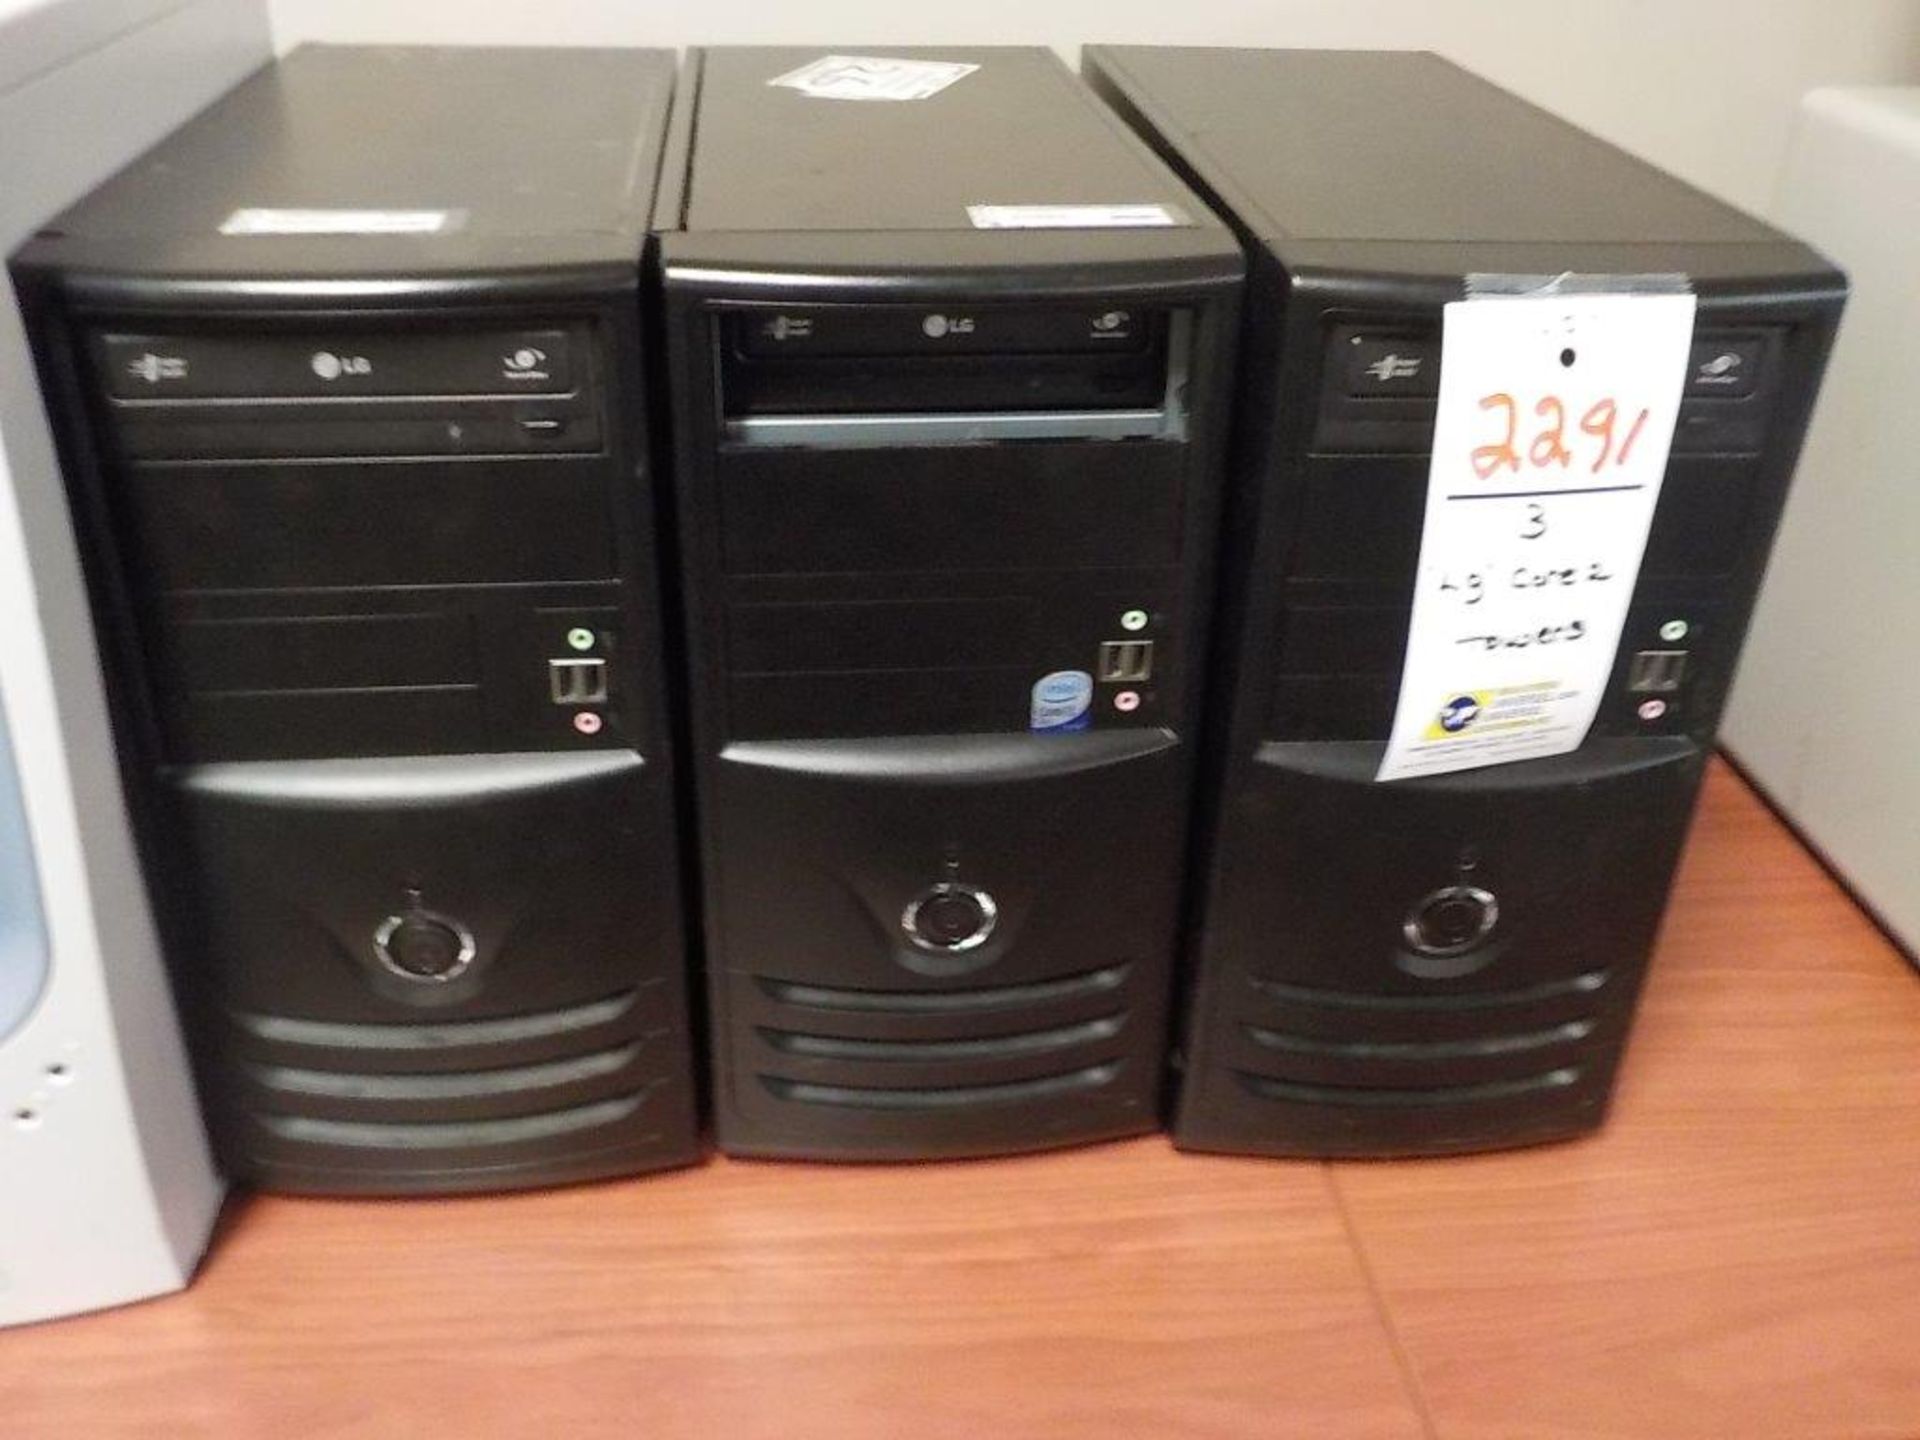 "LG" CORE-2 COMPUTER TOWERS